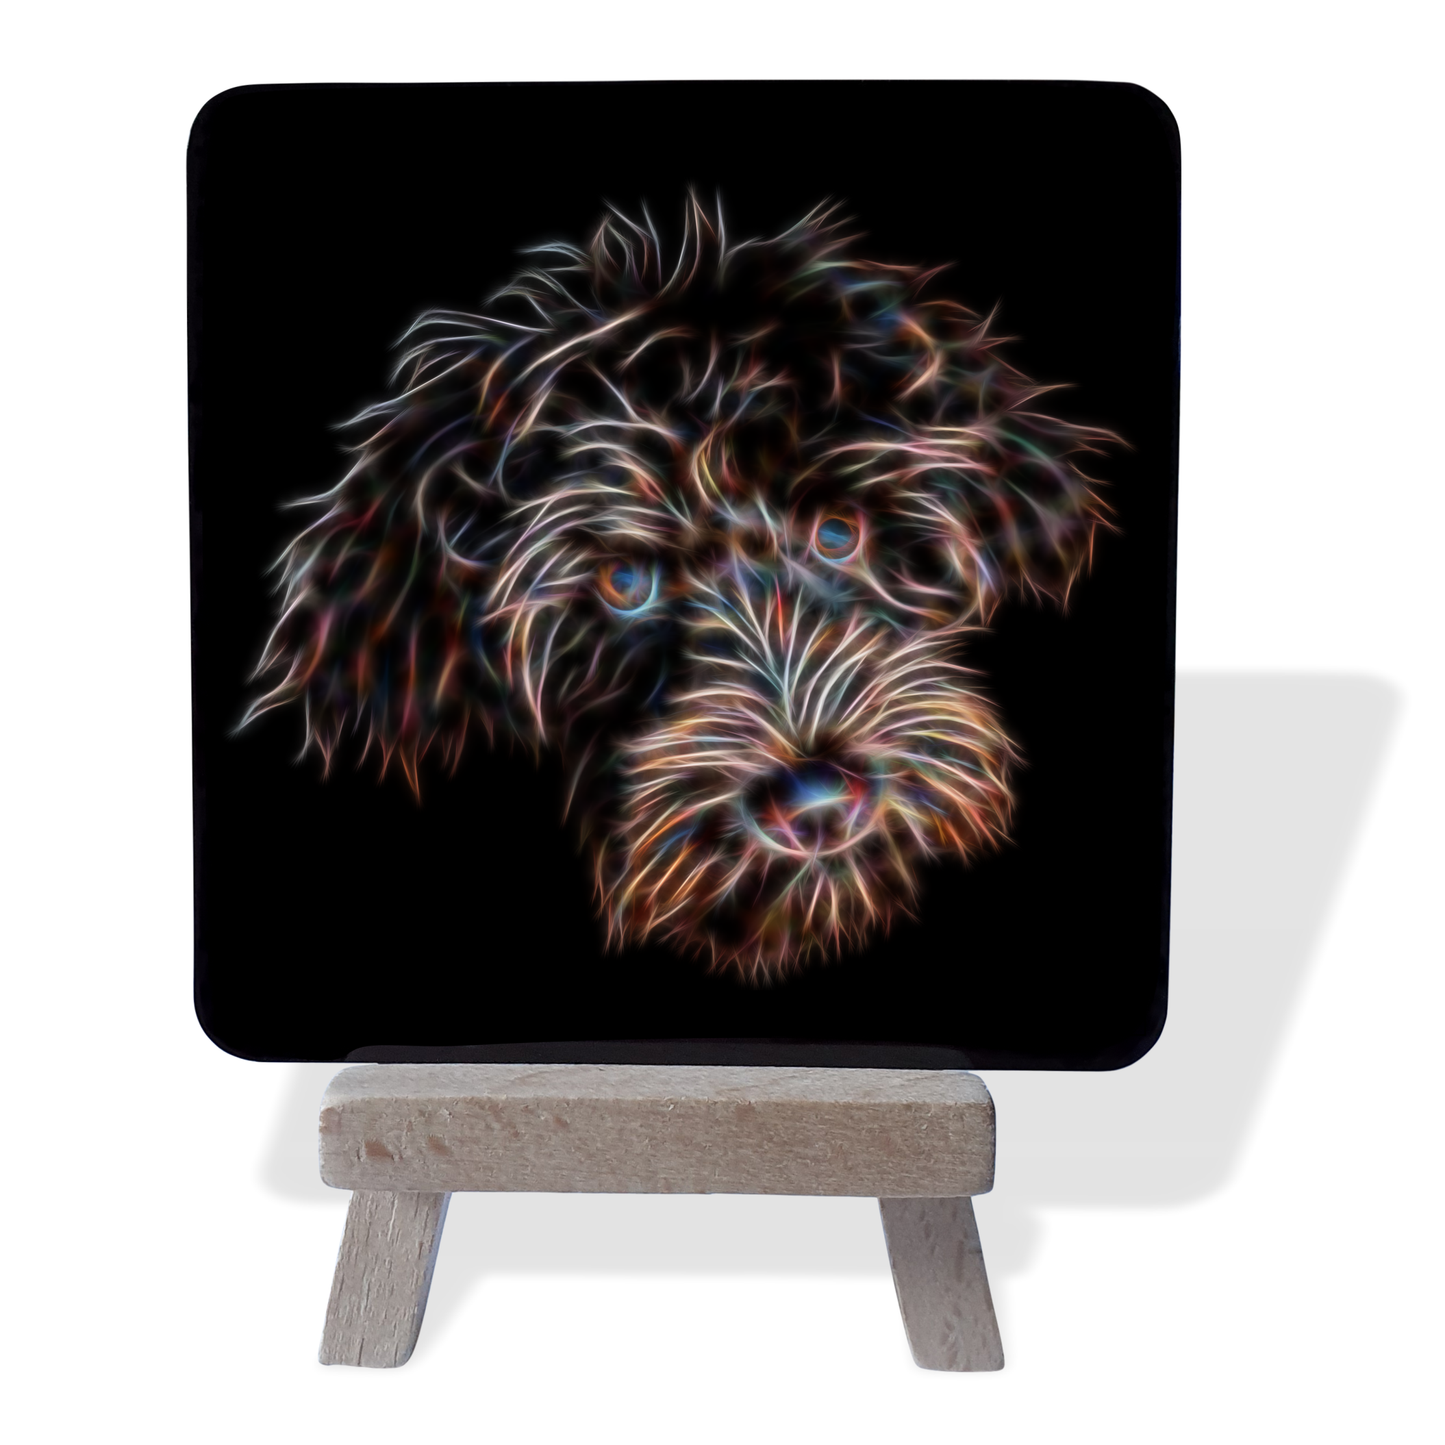 Labradoodle - Chocolate Labradoodle #1 Metal Plaque and Mini Easel with Fractal Art Design